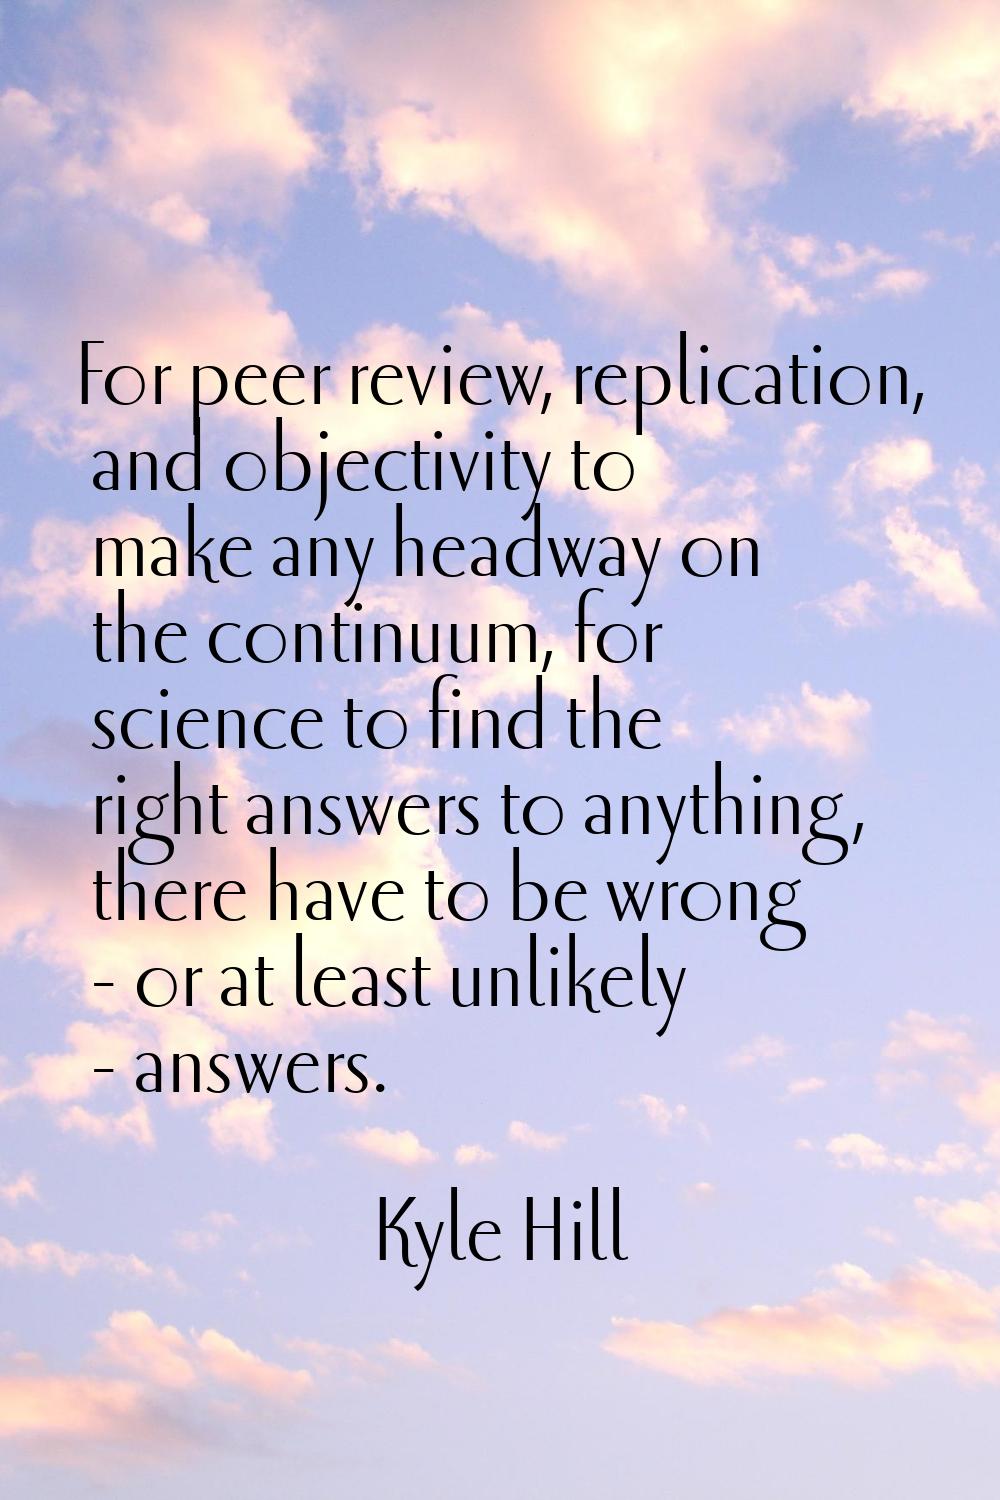 For peer review, replication, and objectivity to make any headway on the continuum, for science to 